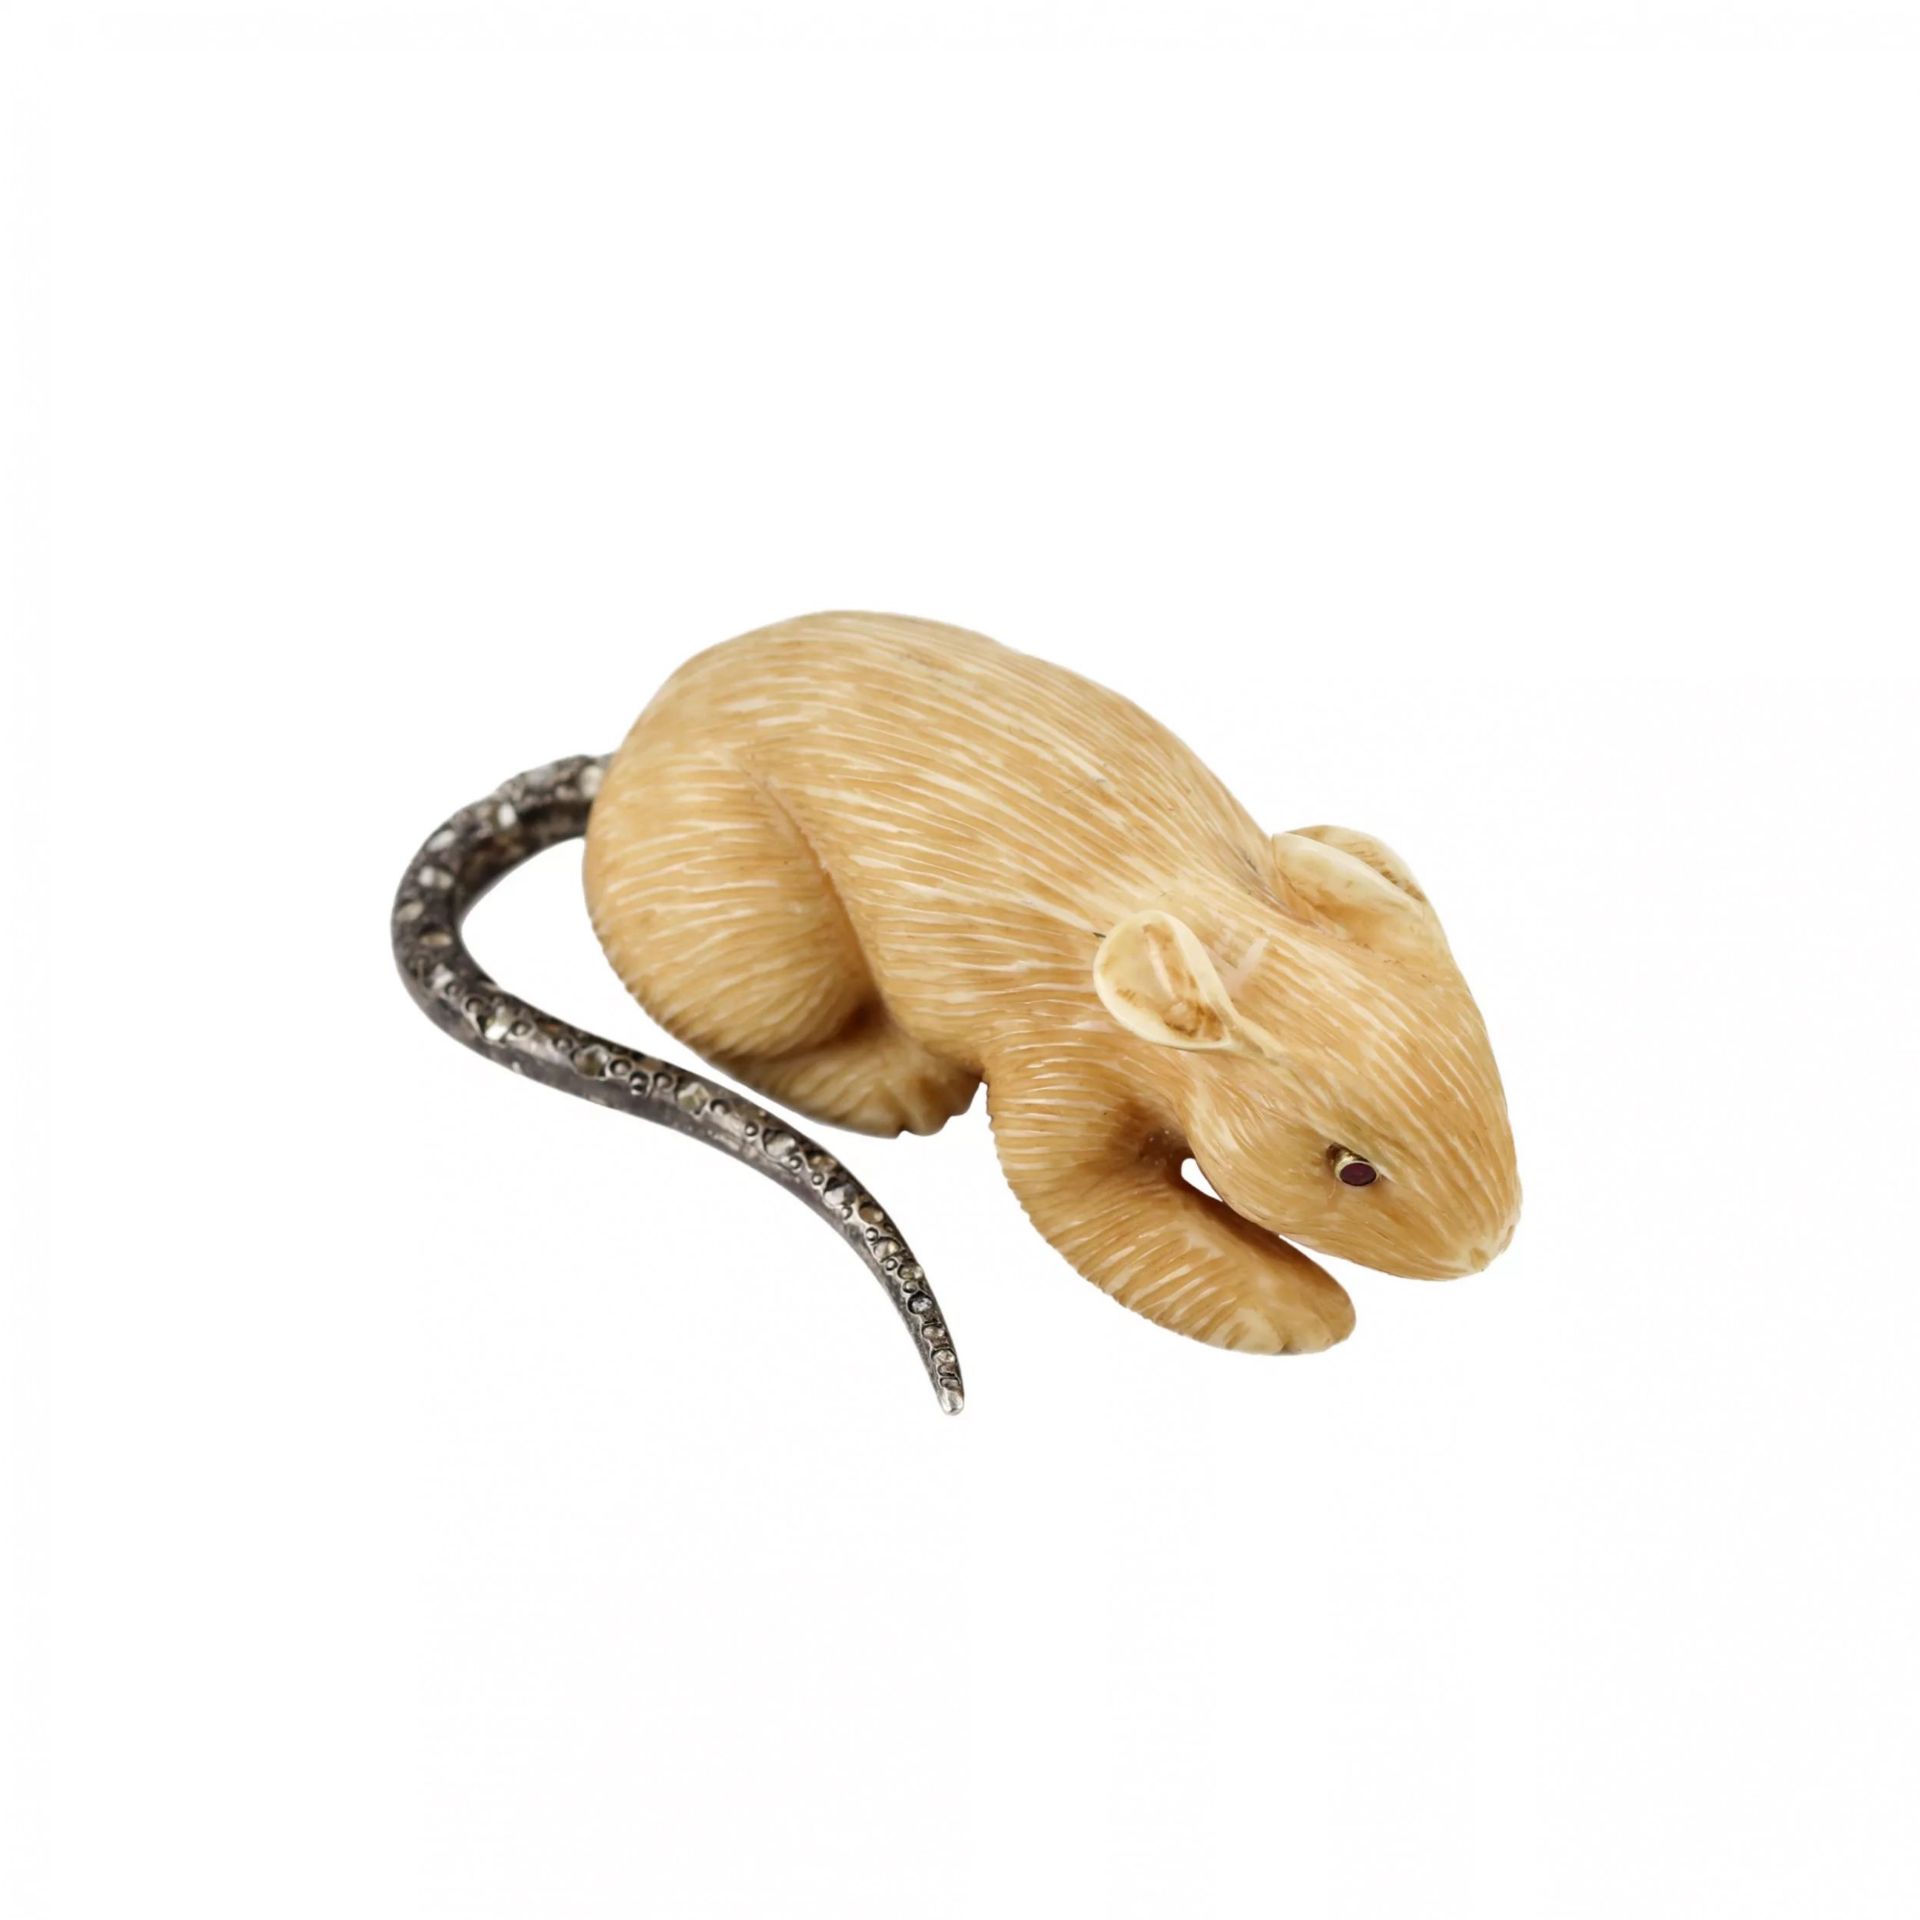 Carved mammoth tusk mouse with diamond tail.